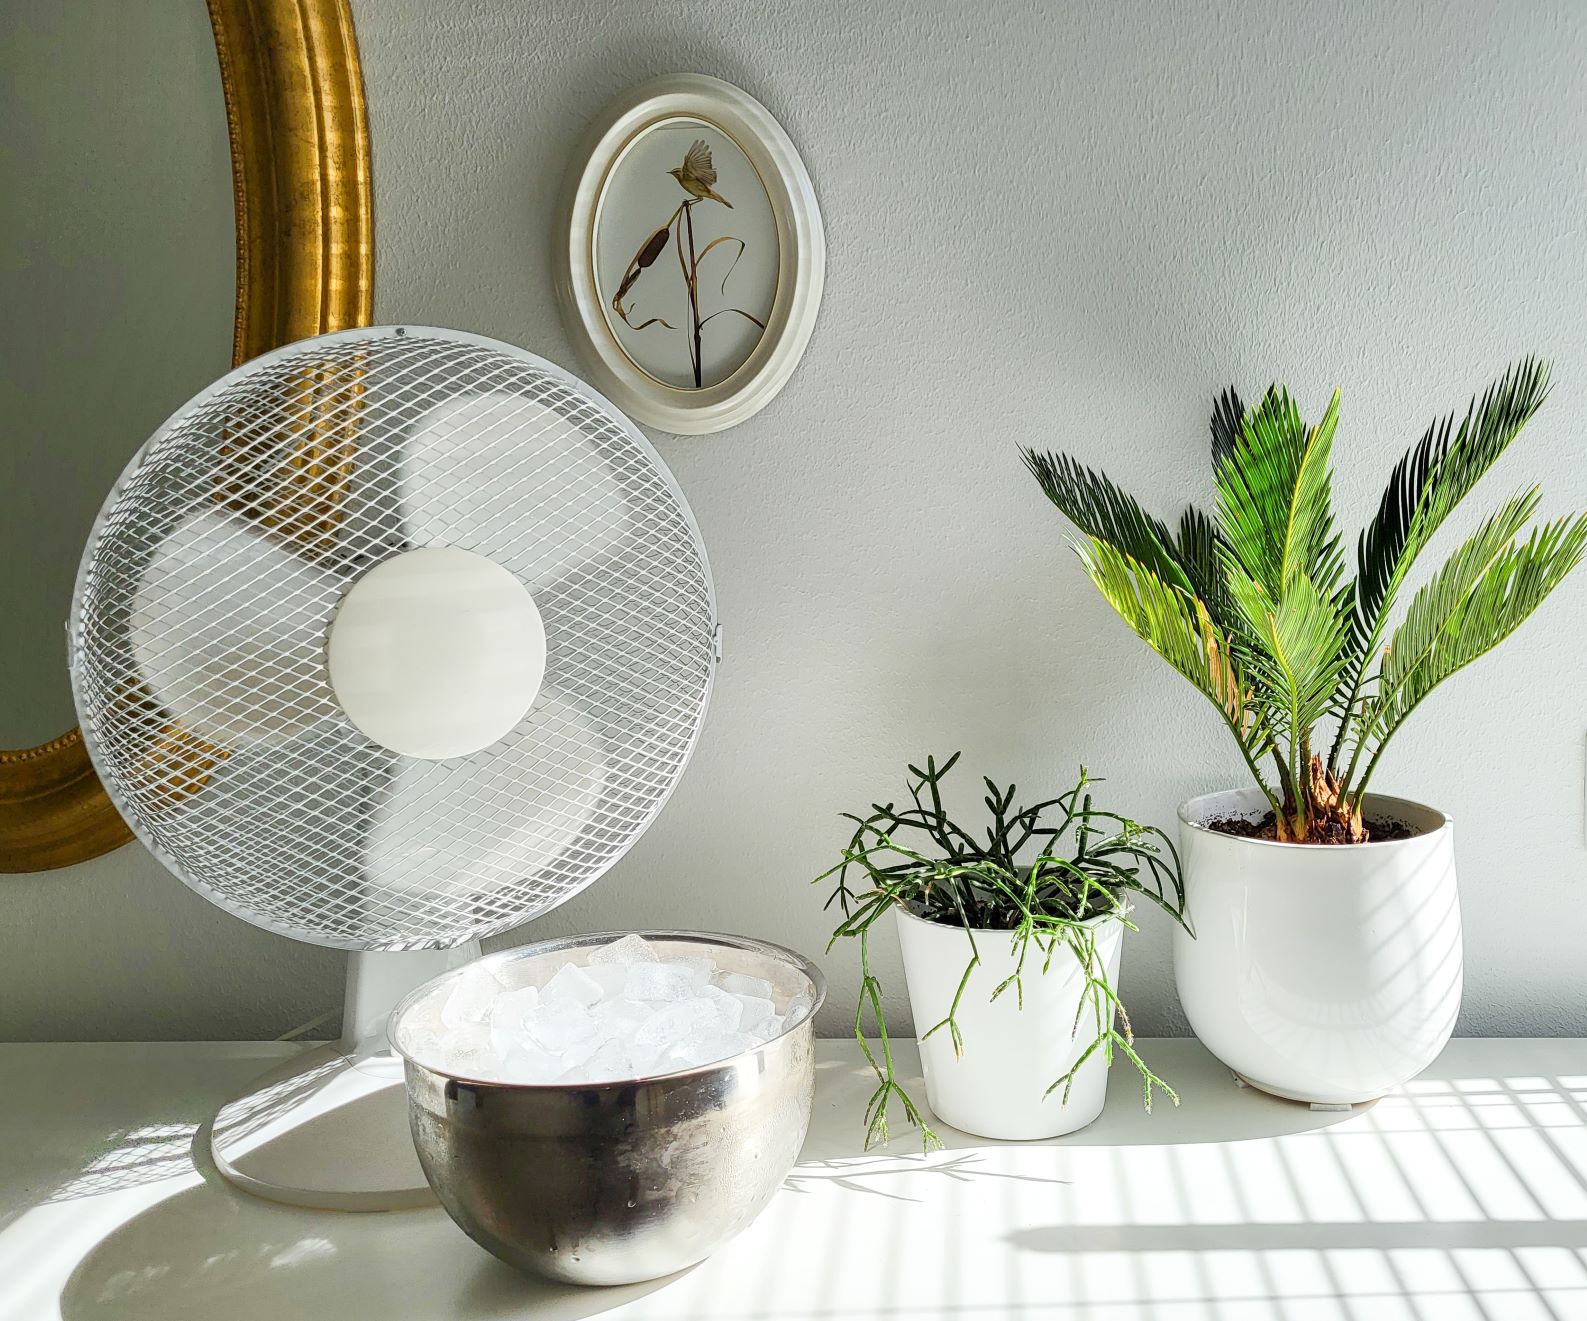 summer tip - put ice cubes in front of your fan